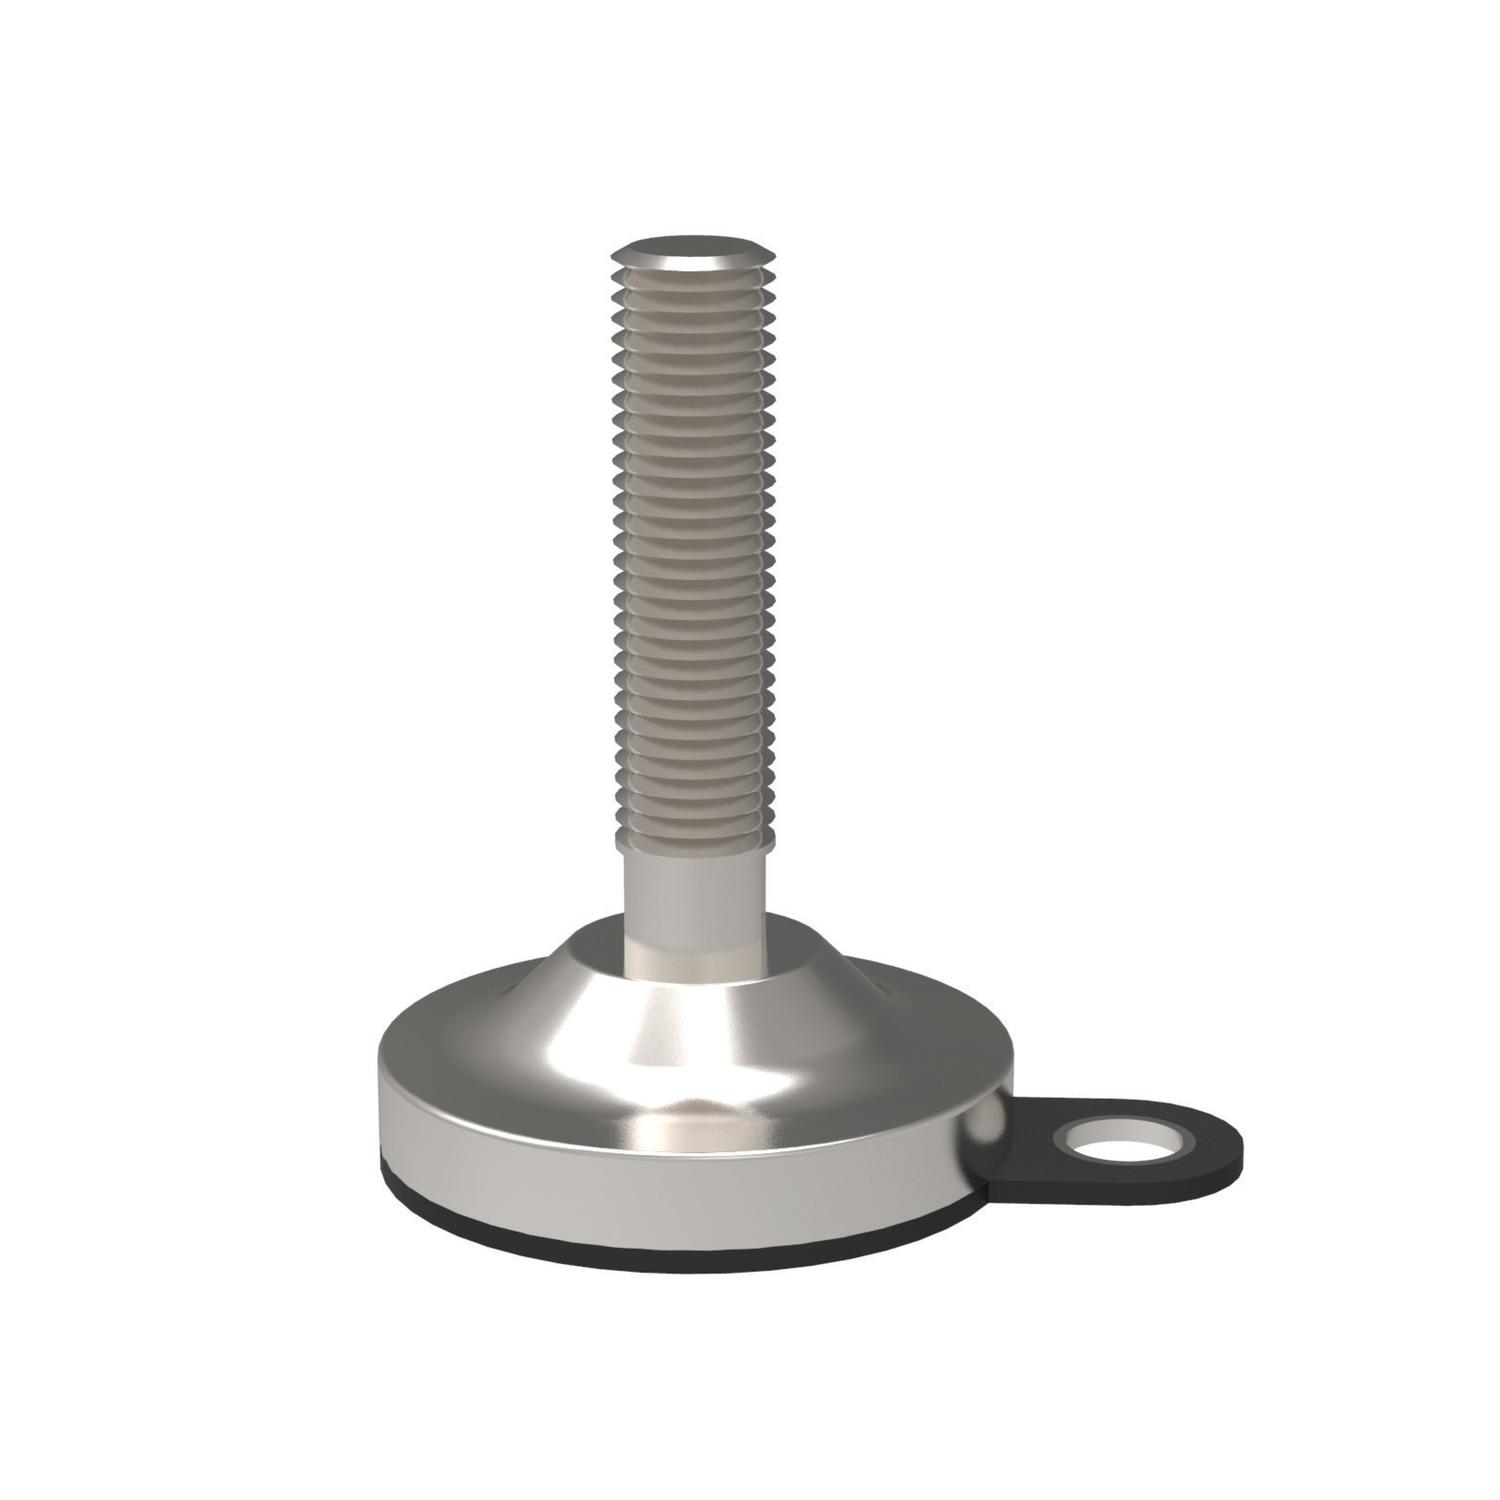 Steel Levelling Feet steel Bolt-down steel levelling feet. Stainless Steel base with valcanized rubber